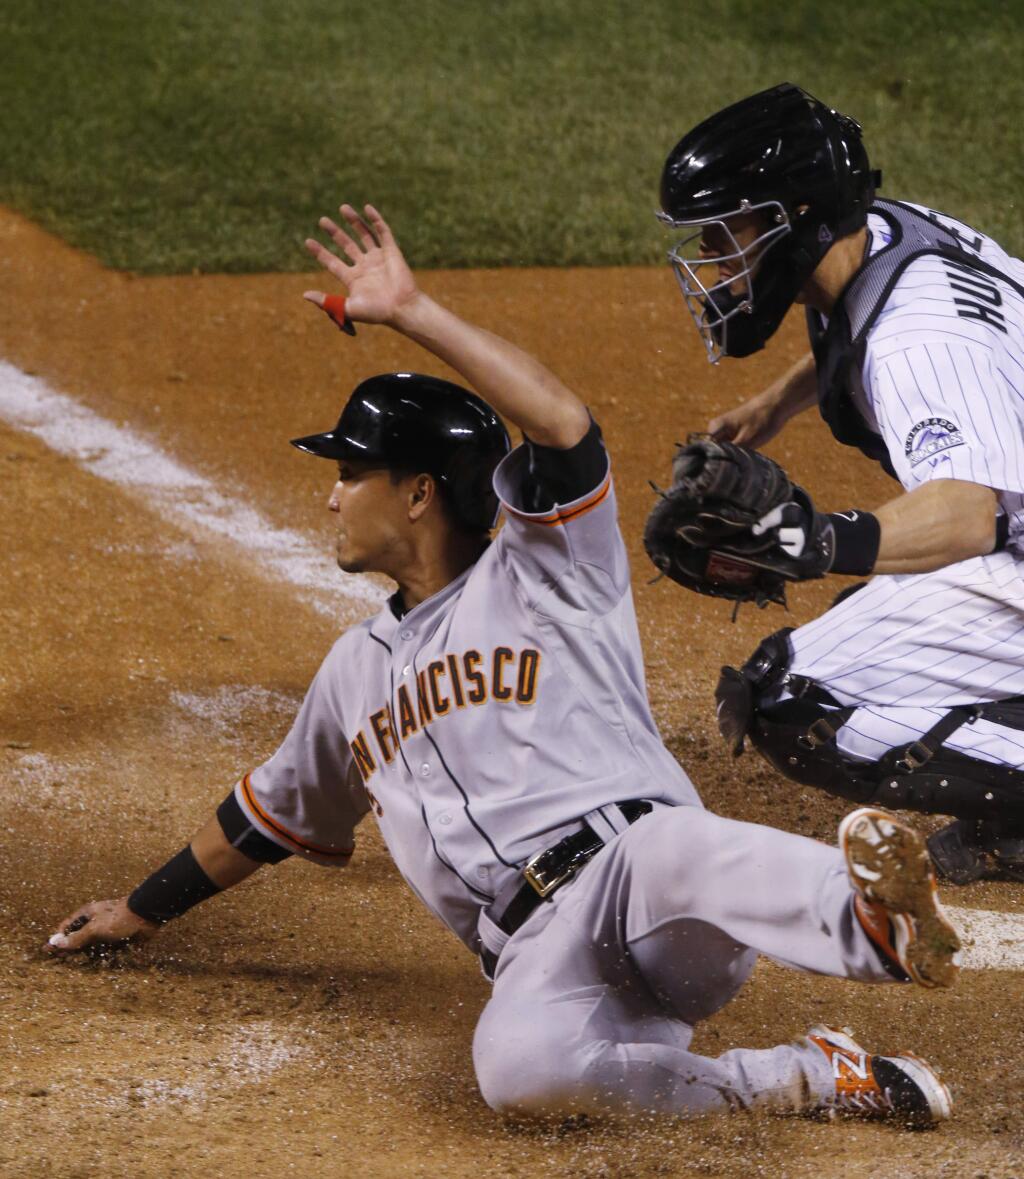 San Francisco Giants' Nori Aoki, left, slides safely across home plate with the go-ahead run next to Colorado Rockies catcher Nick Hundley (4) during the 11th inning of a game Saturday, April 25, 2015, in Denver. The Giants won 5-4 in 11 innings. (AP Photo/David Zalubowski)